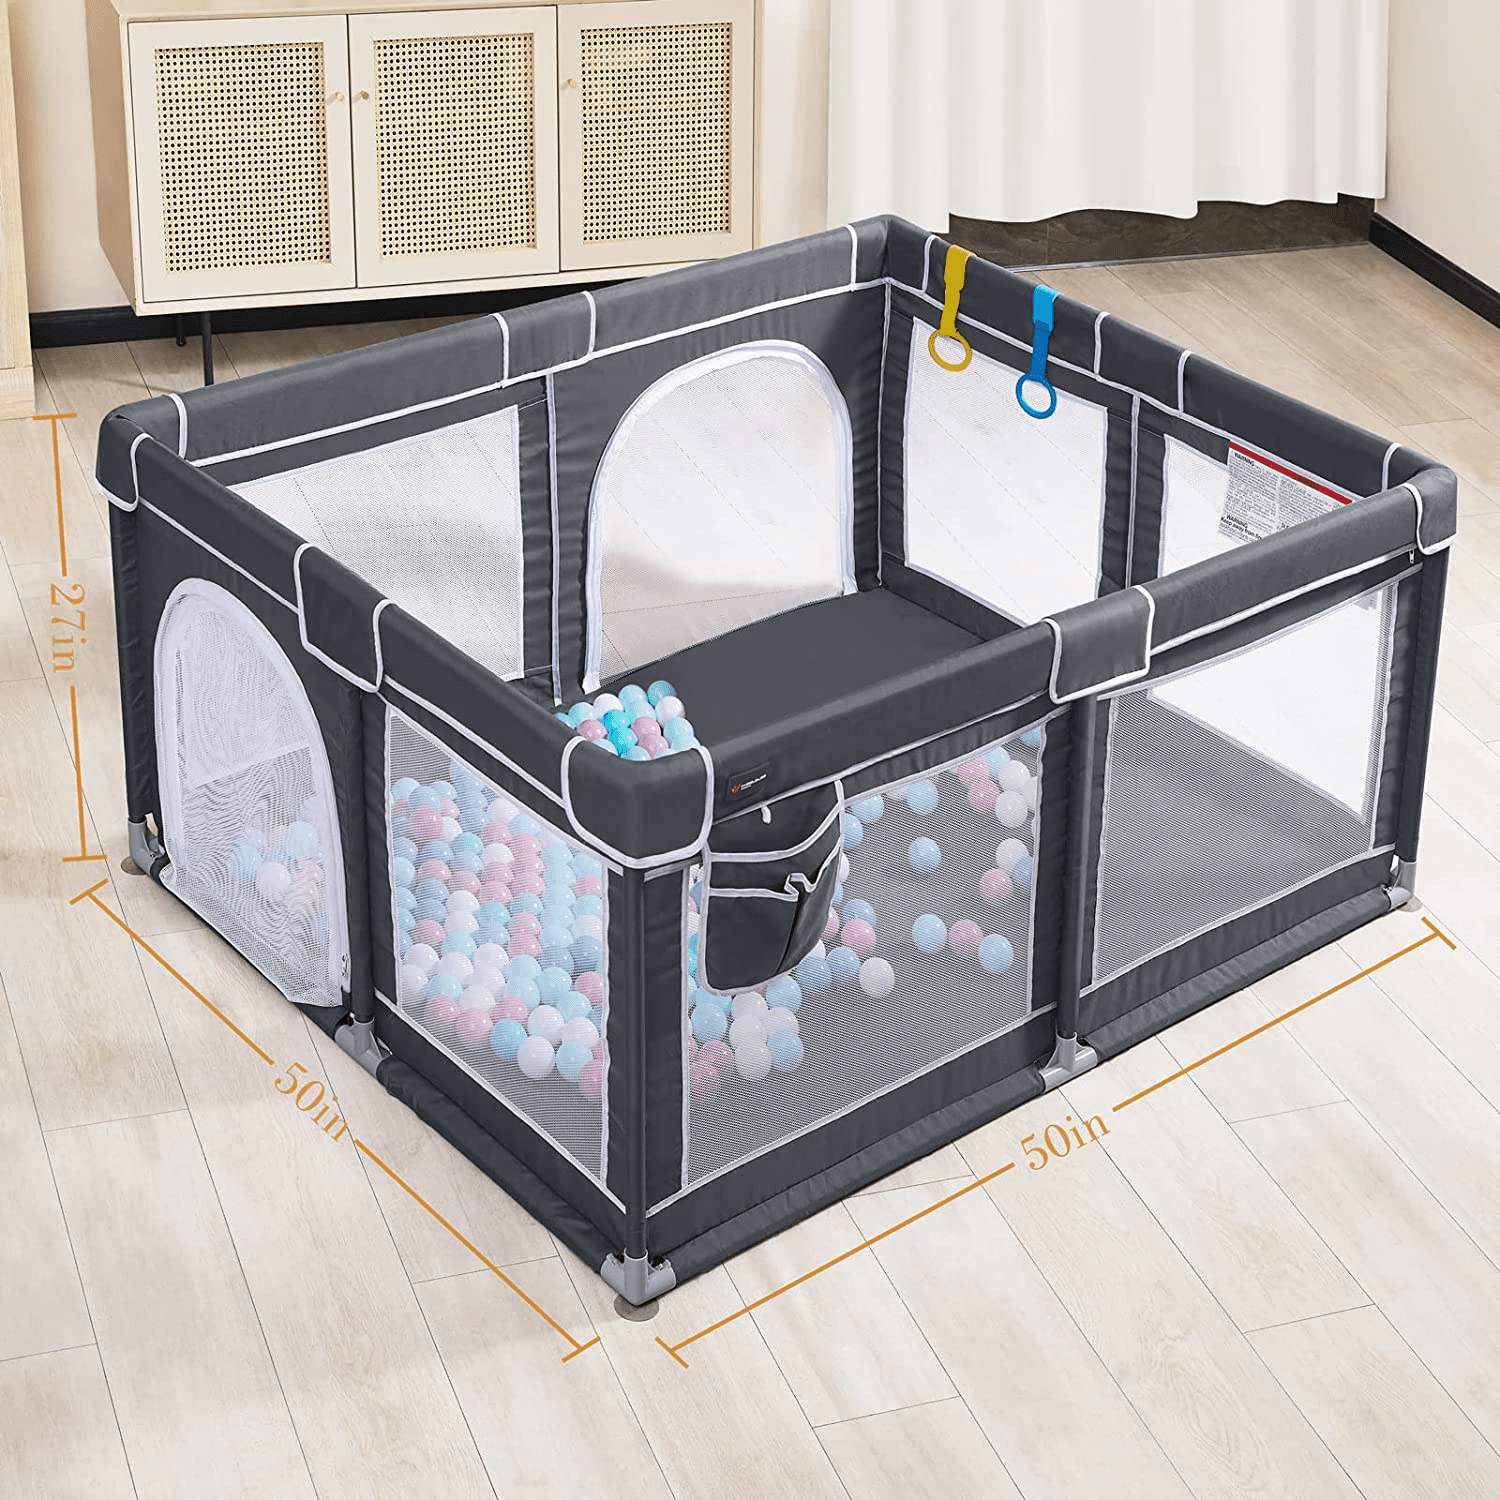 Playpen Mat for Baby to Playing, Thick 50x50 Inch Baby Crawling